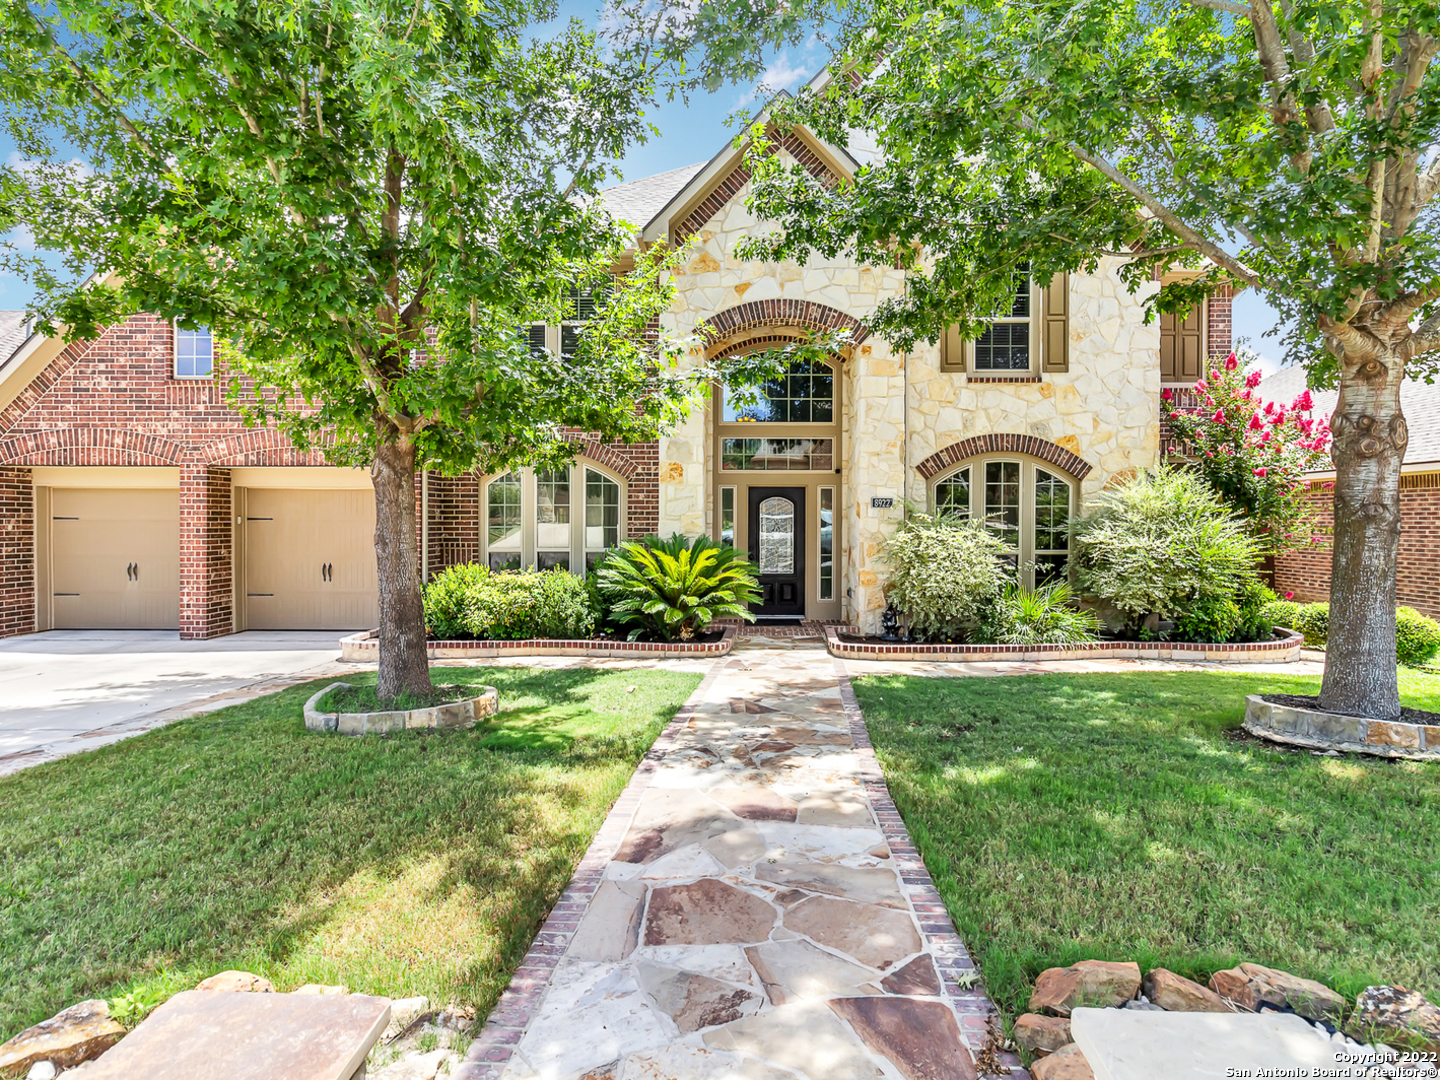 THIS IS IT! WELCOME HOME! This stunning 5bd/4.5bth Perry home is located in the sought after River Rock Ranch neighborhood. Home boasts spacious living space with high ceilings, an abundance of natural light and oversized windows. Both the interior and exterior space are perfect for family fun and entertaining. Downstairs offers a large primary bedroom with a full bathroom and 2 closets, a guest bedroom with a full bath plus a half bath in the hallway. Upstairs has 3 large bedrooms, 2 full bathrooms, oversized game room and media room. Your private backyard includes a covered patio with an extended deck.